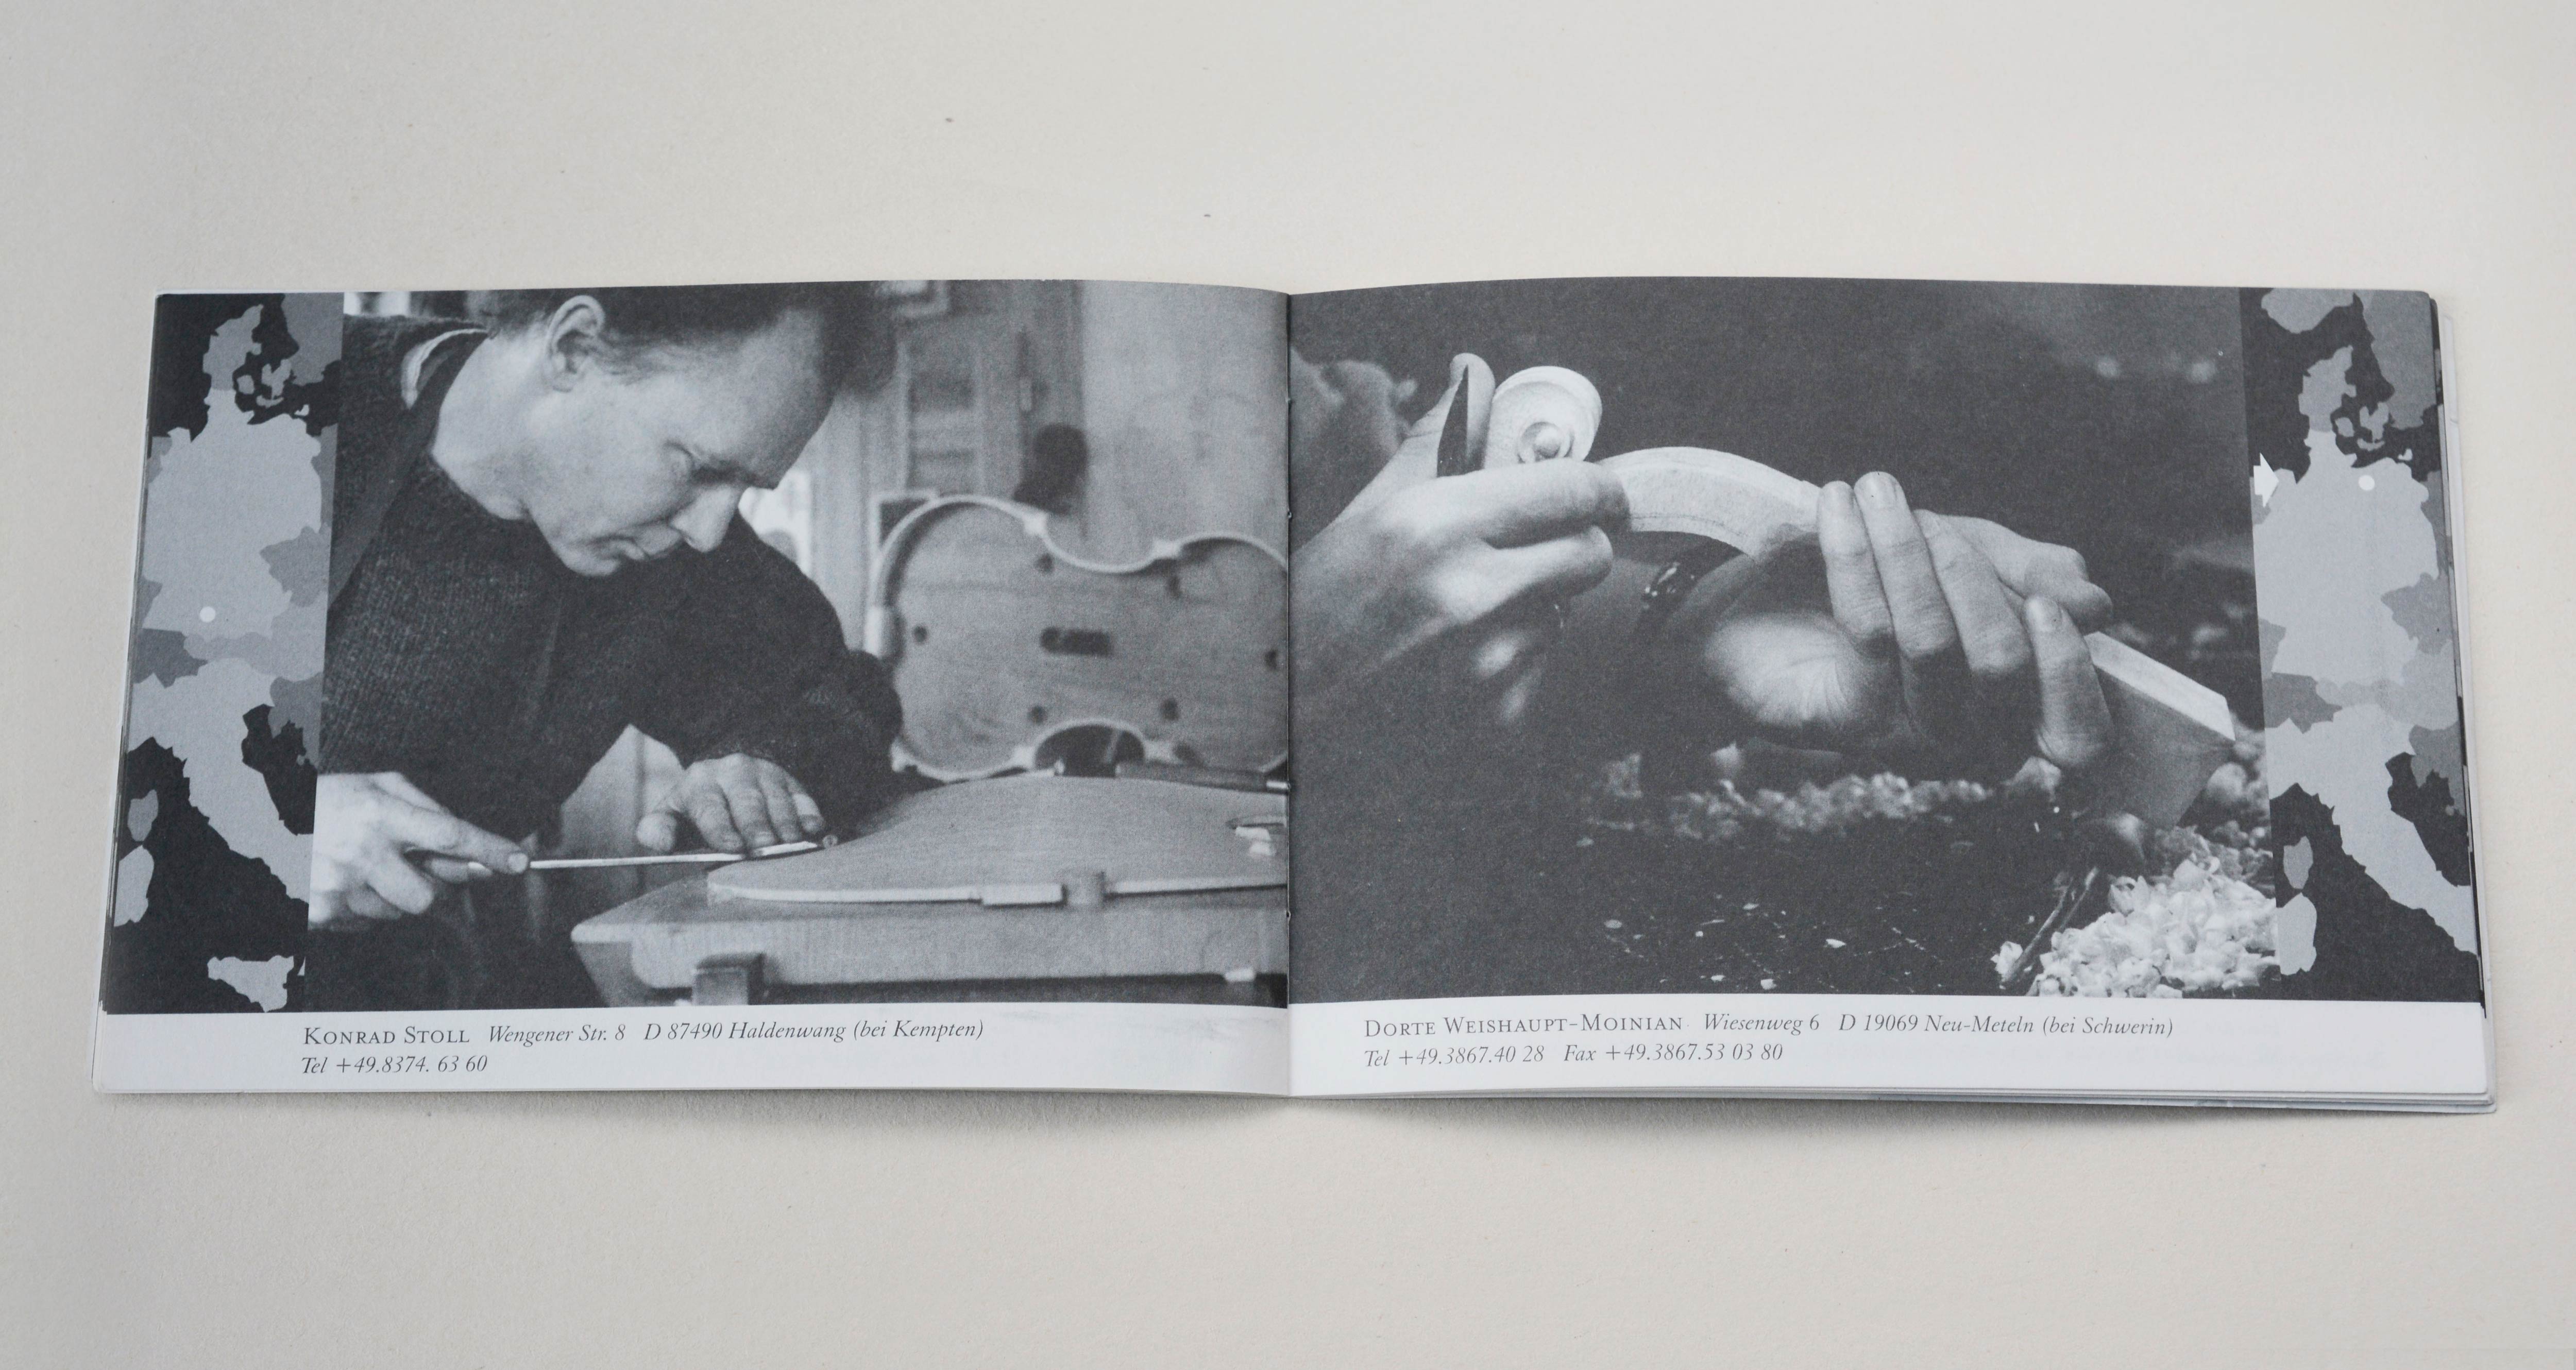 Double page. On each page full-page b/w photos. Column-sized map with marking point at the edges covering part of photo. Line of small text in white space underneath. Left: Man carving on top plate of violin. Right: 2 hands hold violin scroll.